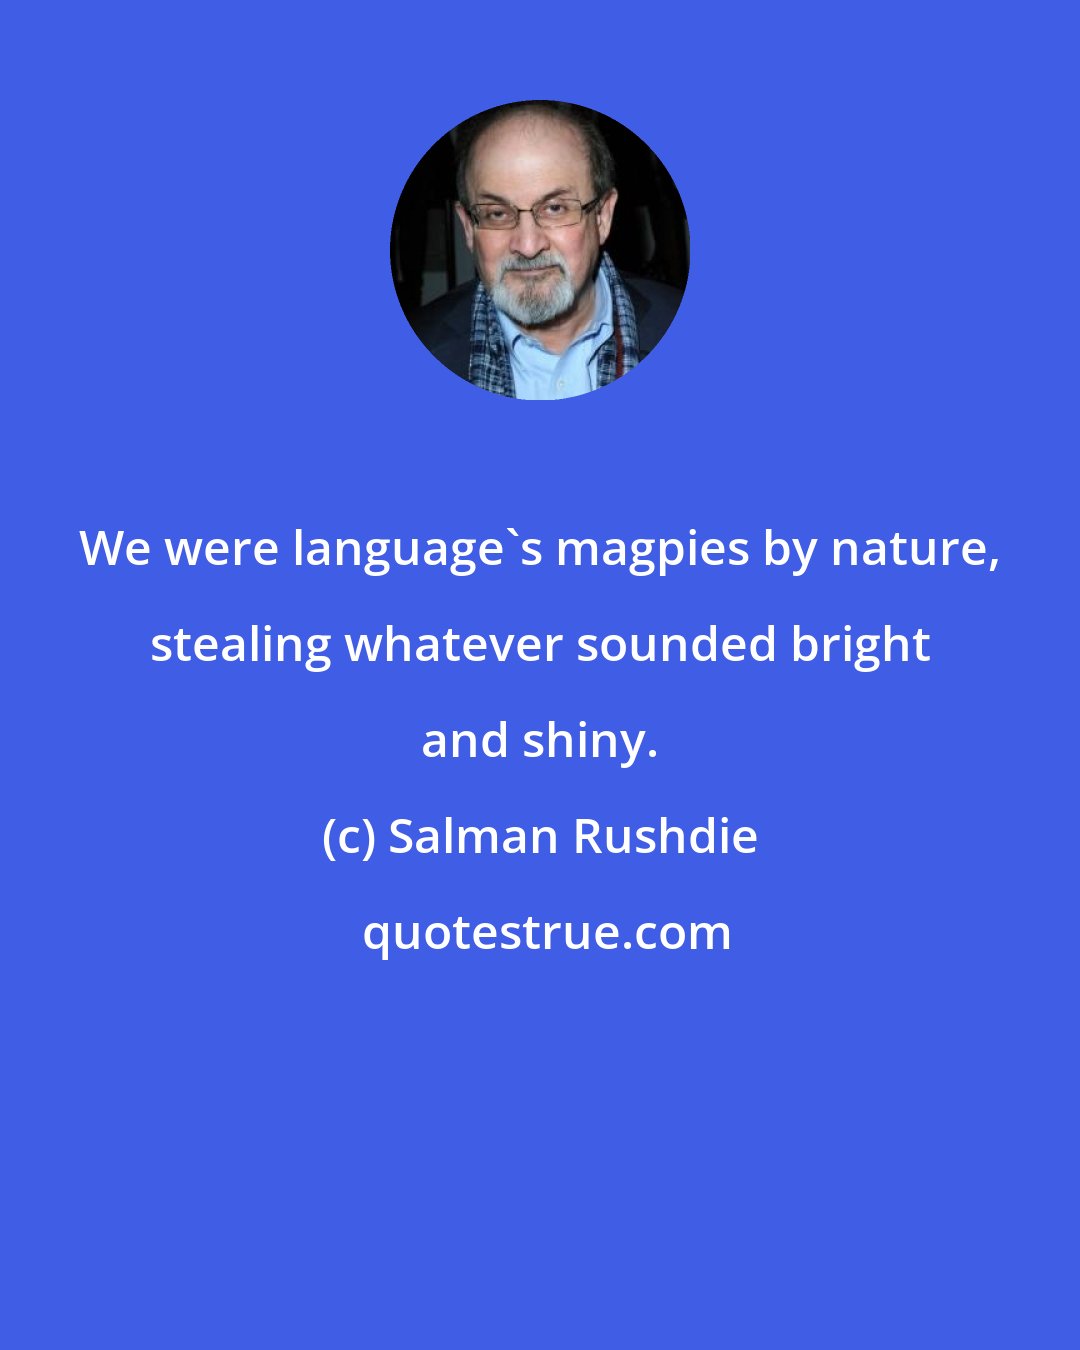 Salman Rushdie: We were language's magpies by nature, stealing whatever sounded bright and shiny.